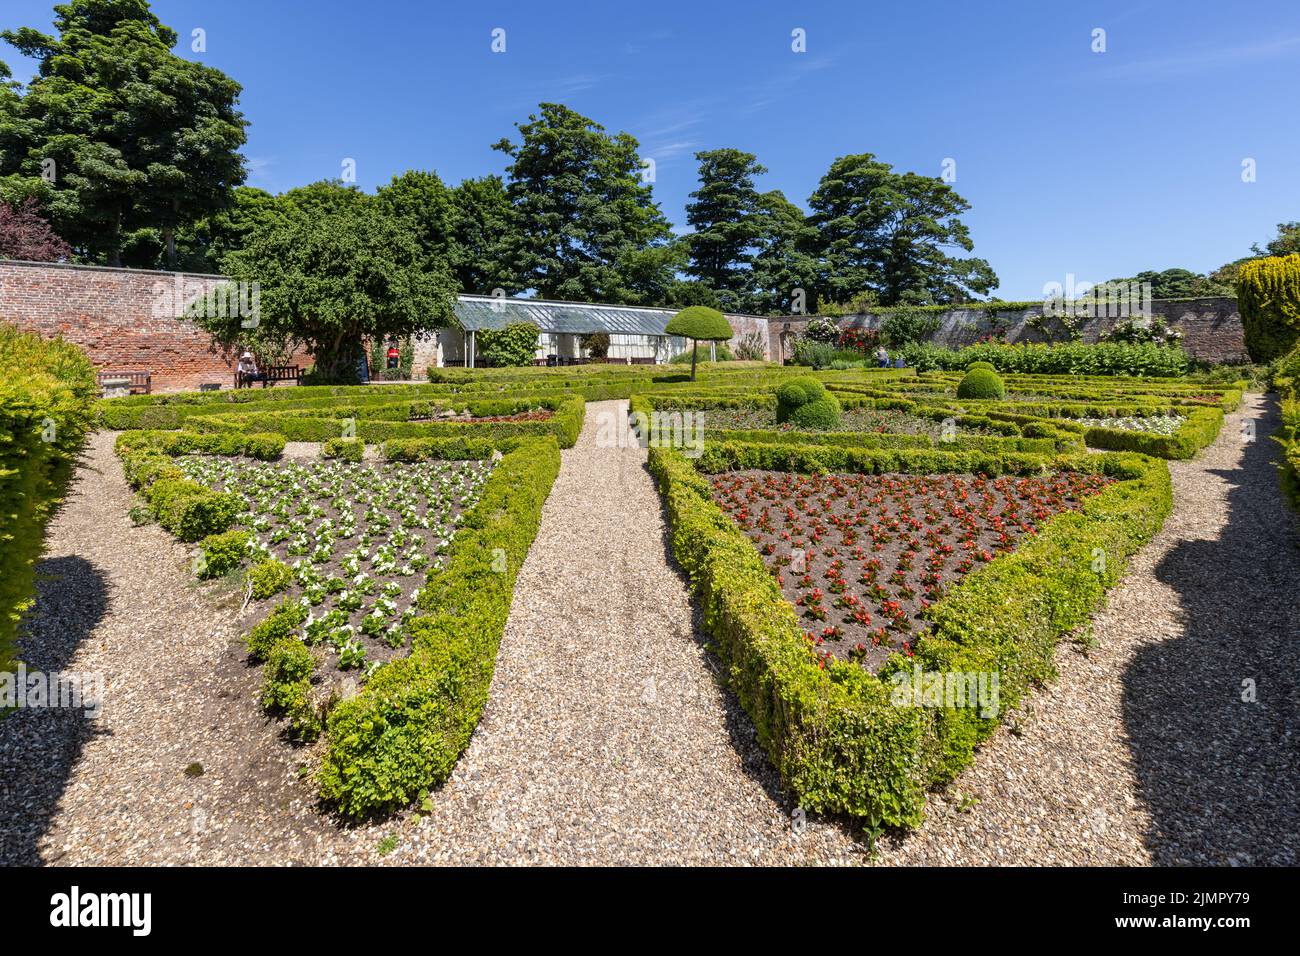 Sewerby Hall and Gardens, a Georgian country house near Bridlington, East Yorkshire, England, Uk Stock Photo